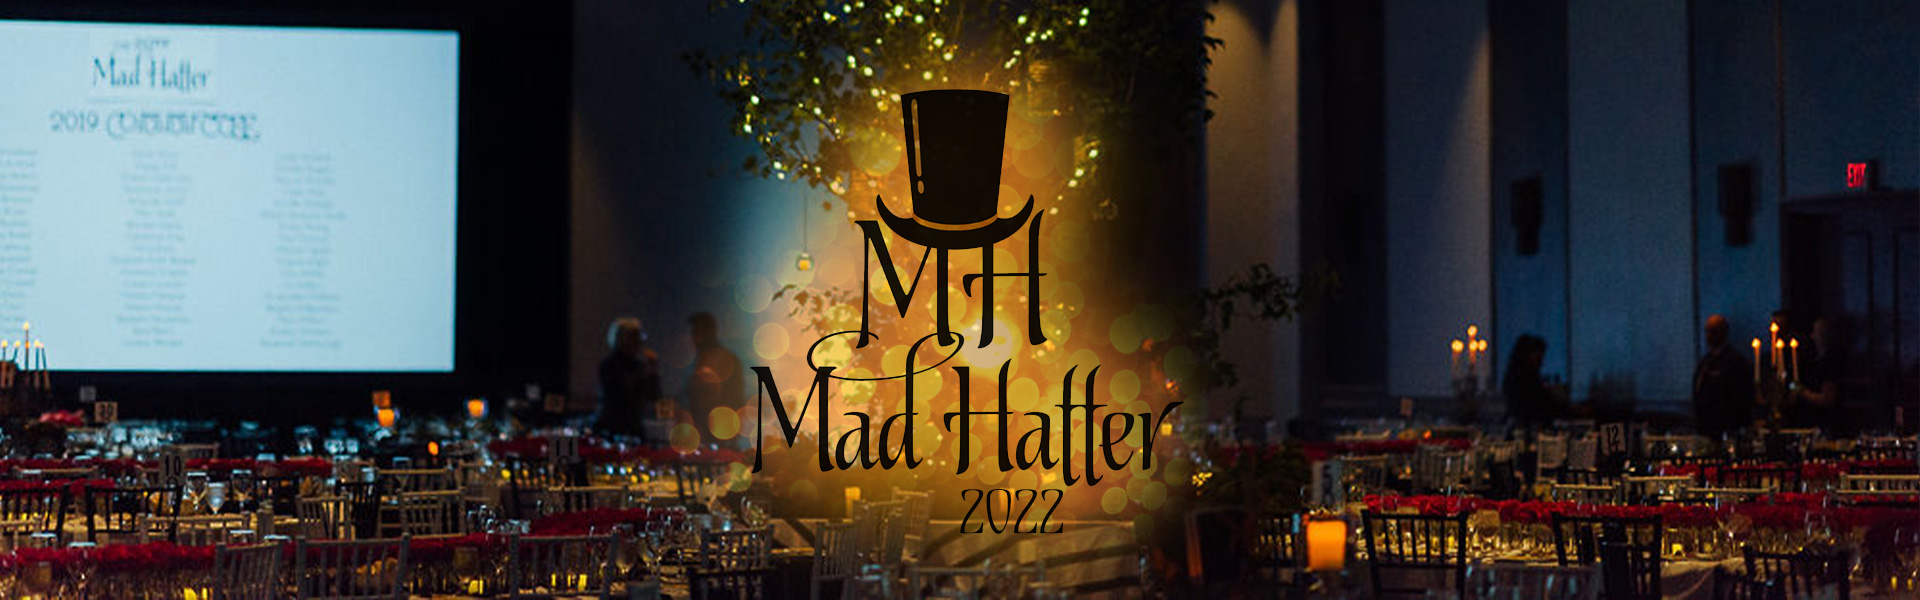 Mad Hatter Ball